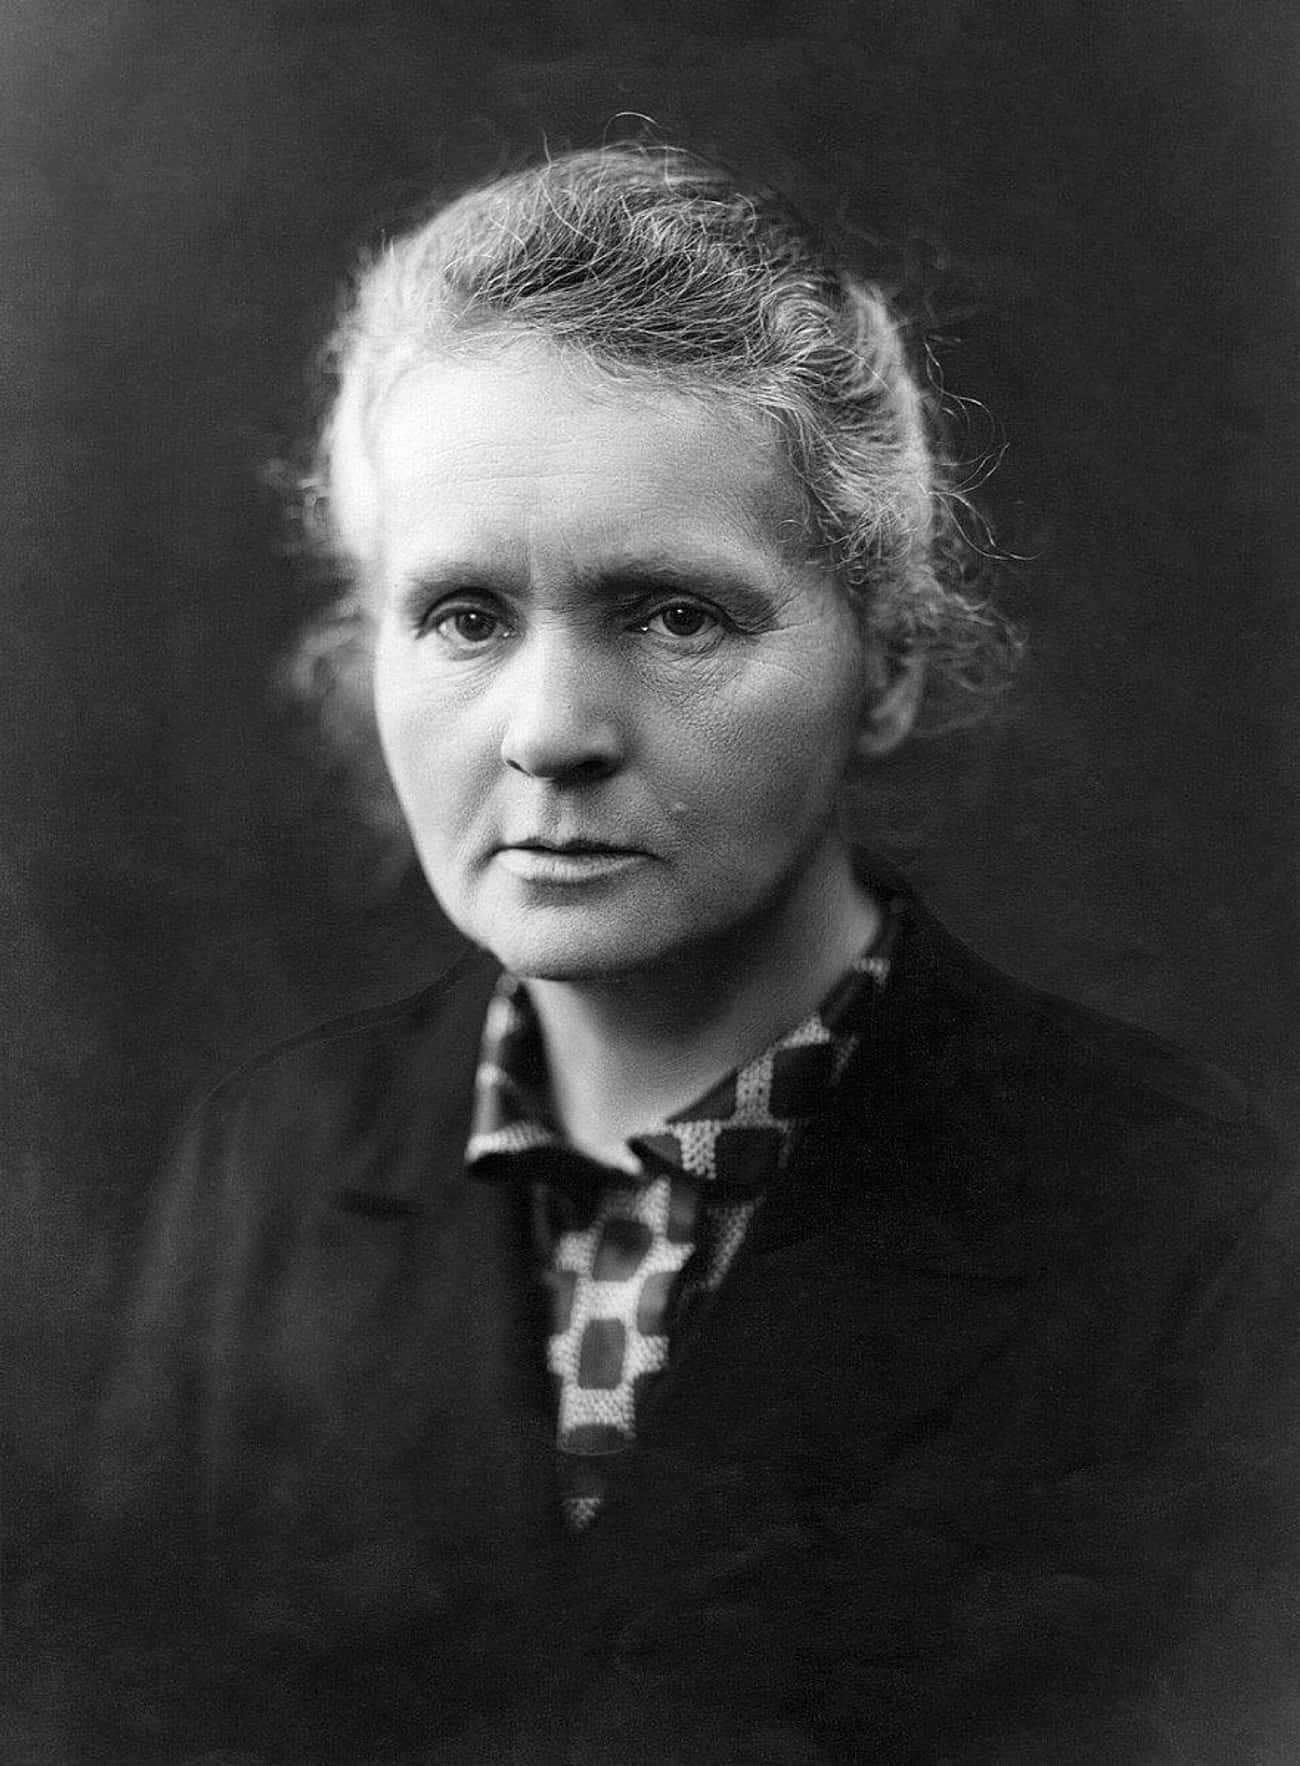 Marie Curie Tested The Effects Of Radioactivity And Paid The Price